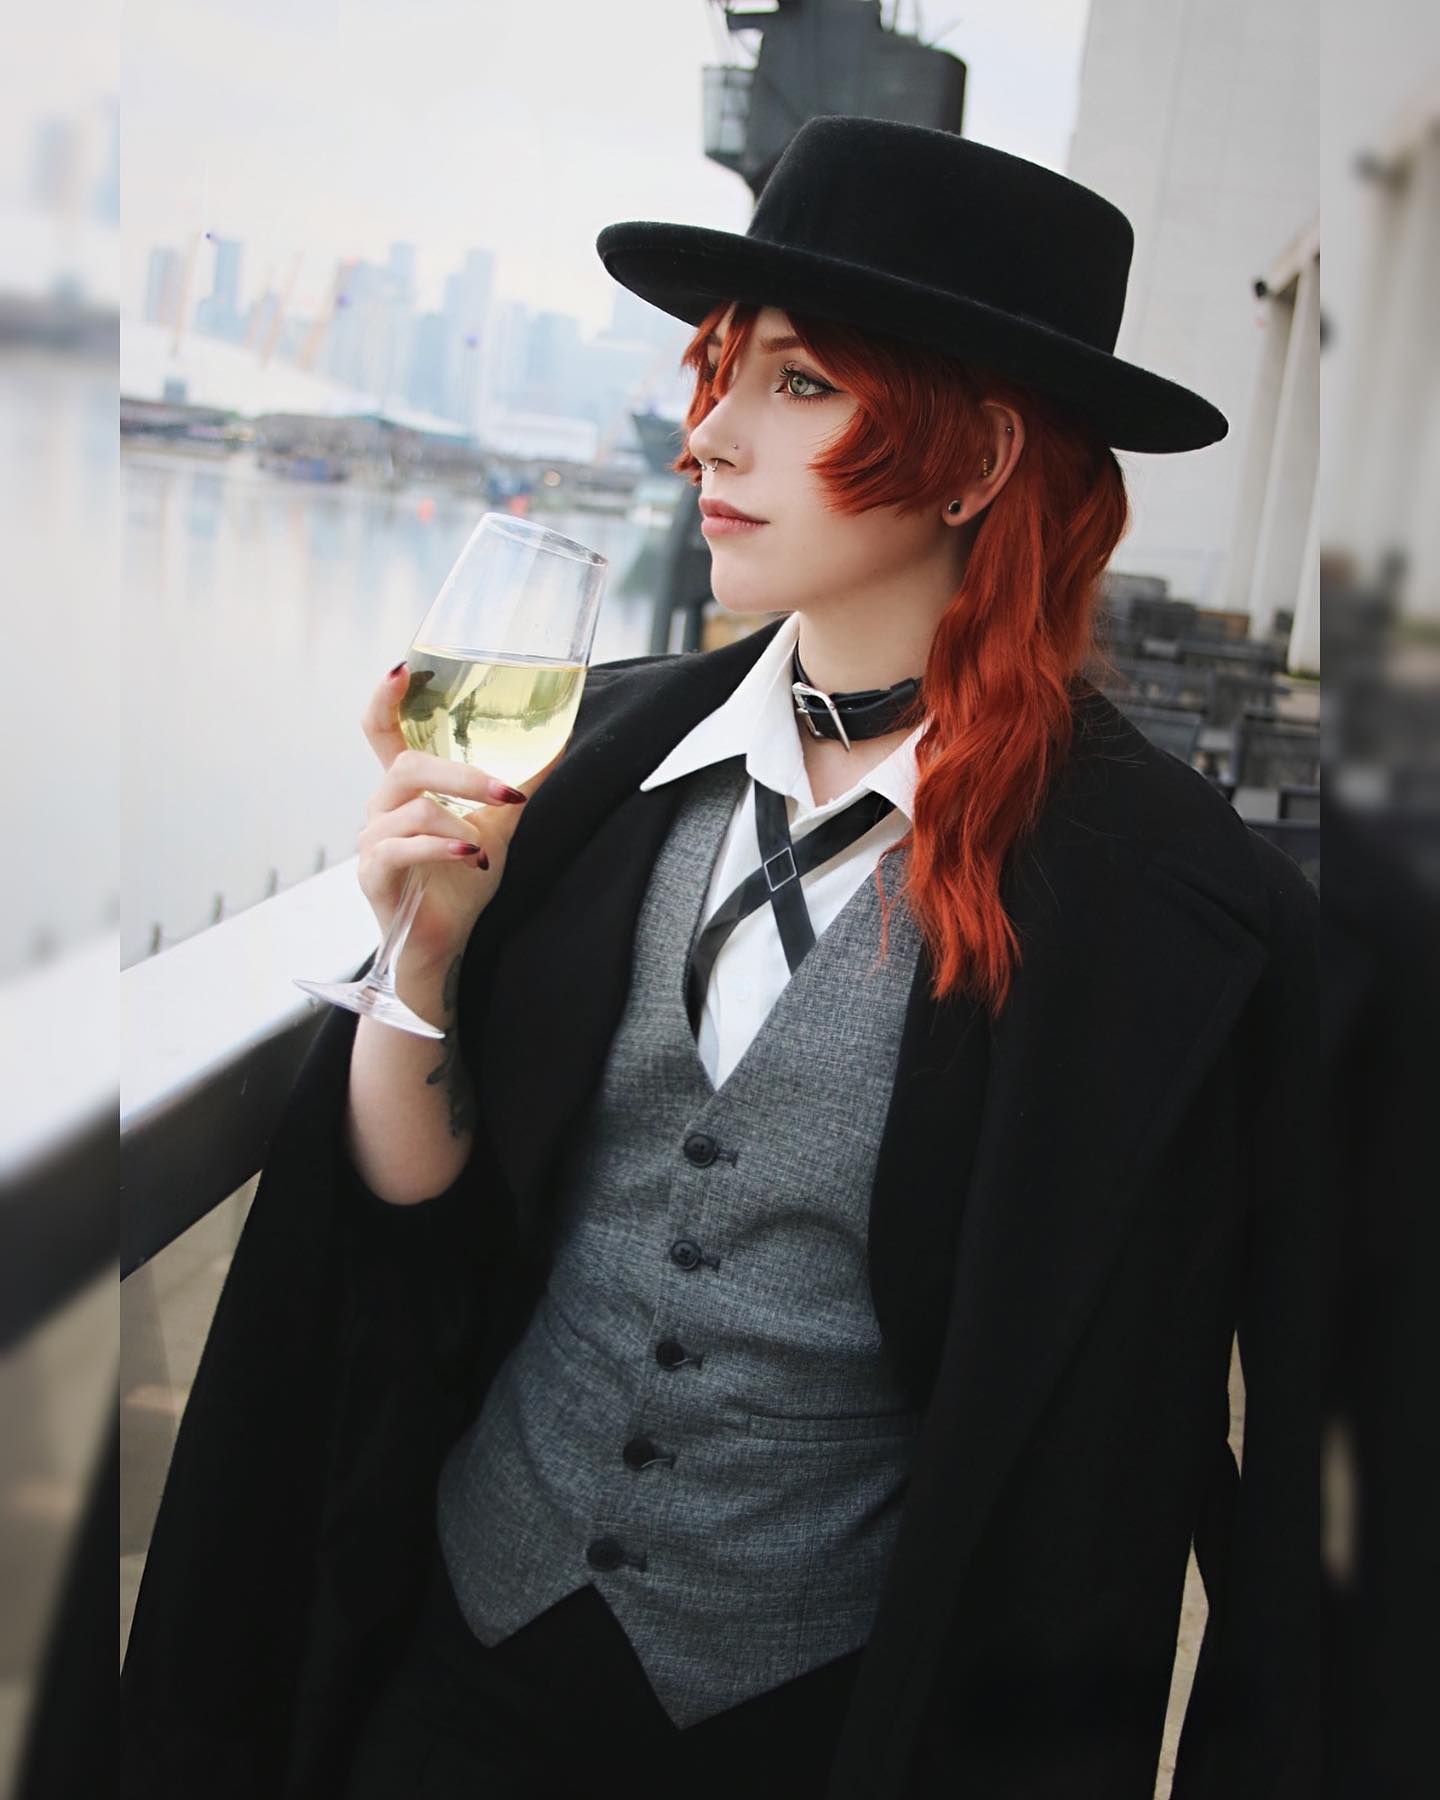 “damn it, this sly bastard is going to ruin my drink.”
~
some more chuuyyaa 🍷 i miss the novotel bar 😂
~
⛓cosplayer: @riotwolf.cos 
🍷character: chuuya nakahara
⛓anime: bungou stray dogs
📸 @hyper.cos @hypercos.photography 
~
~
~
#chuuya #chuuyacosplay #chuuyanakahara #bungoustraydogs #bungoustraydogscosplay #soukoku #bsd #bsdcosplay #bungostraydogs